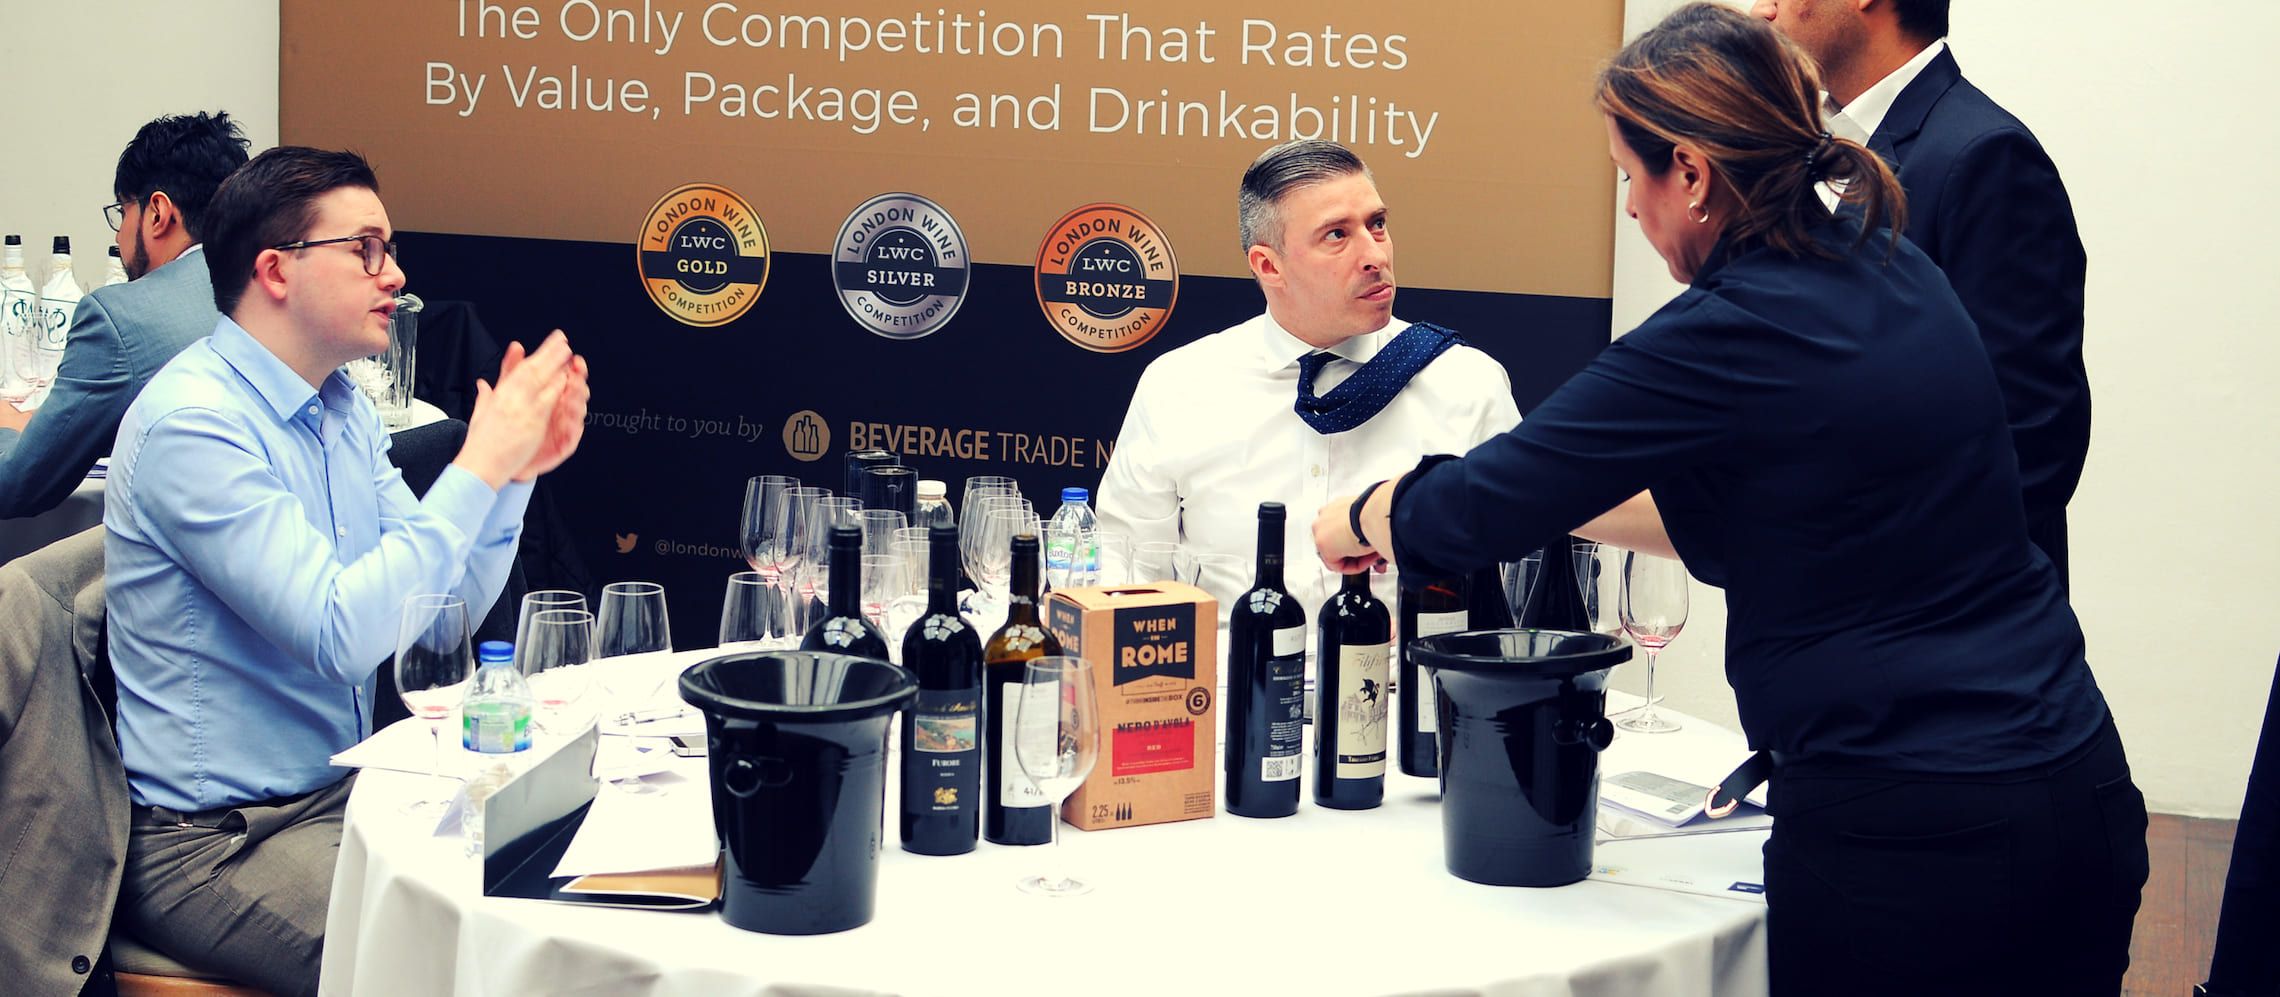 Photo for: Presentation Is Important Says The Leading Sommeliers